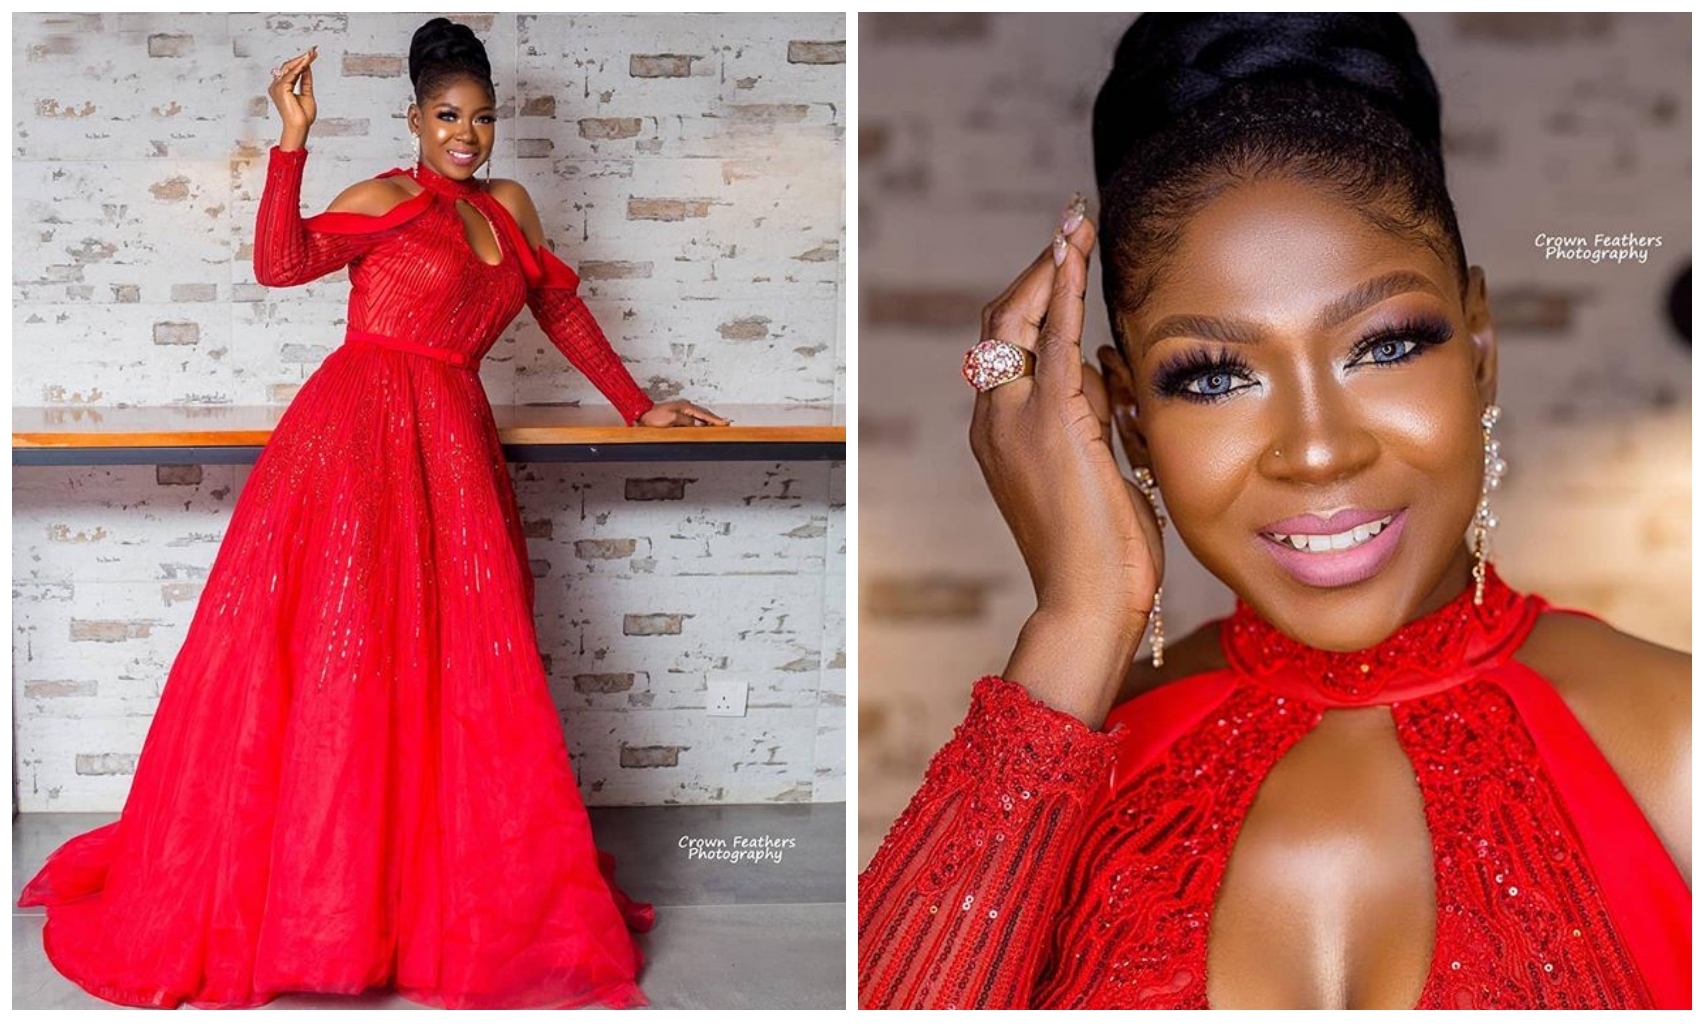 Adunni Ade, Uche Ogbodo, Roskie others celebrates Susan Peters on her 40th birthday (Photos)